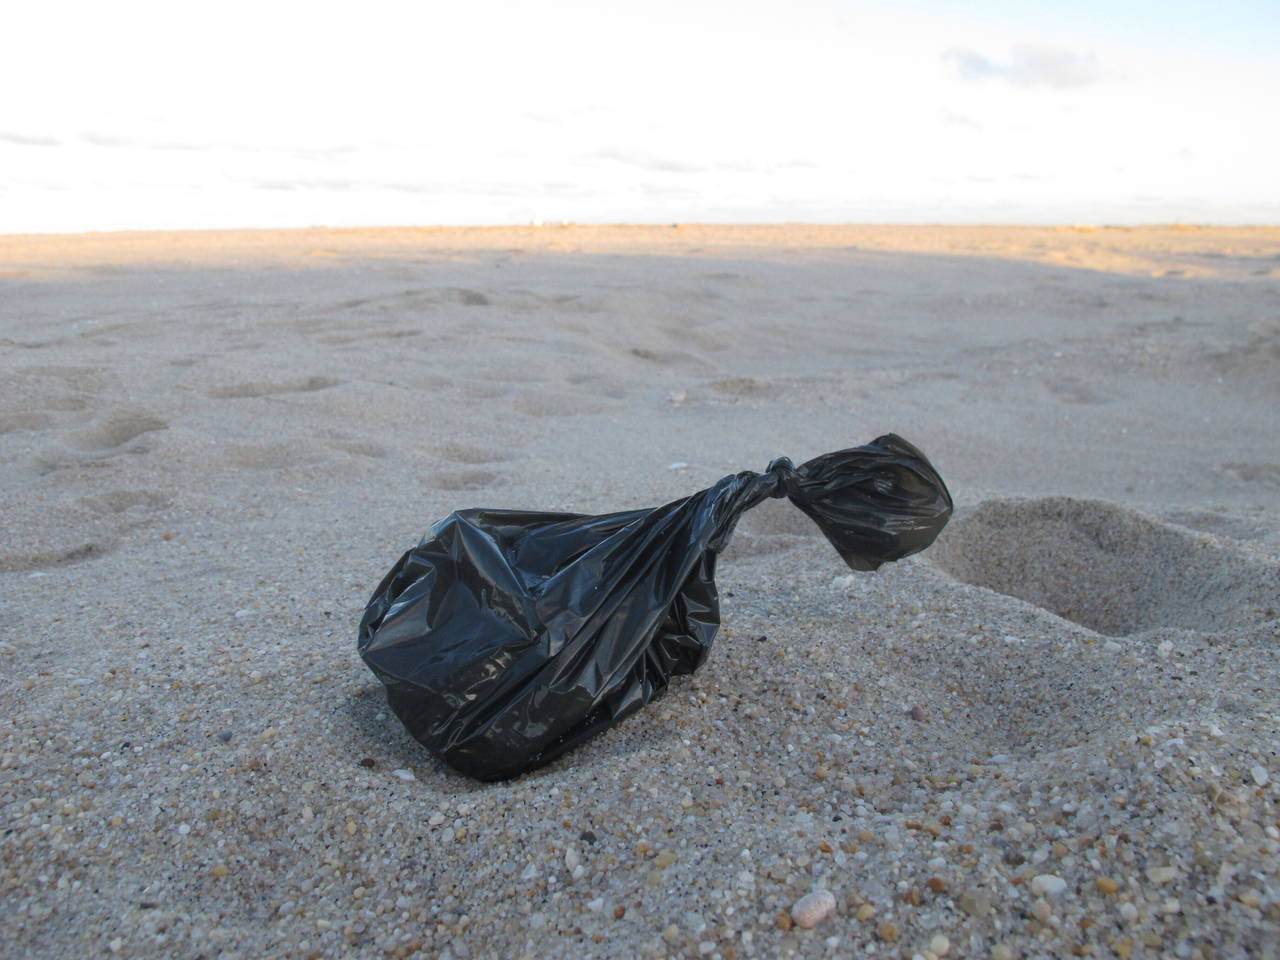 This Feb. 6, 2022, photo shows a plastic bag, possibly containing pet waste, on the sand in Sandy H...